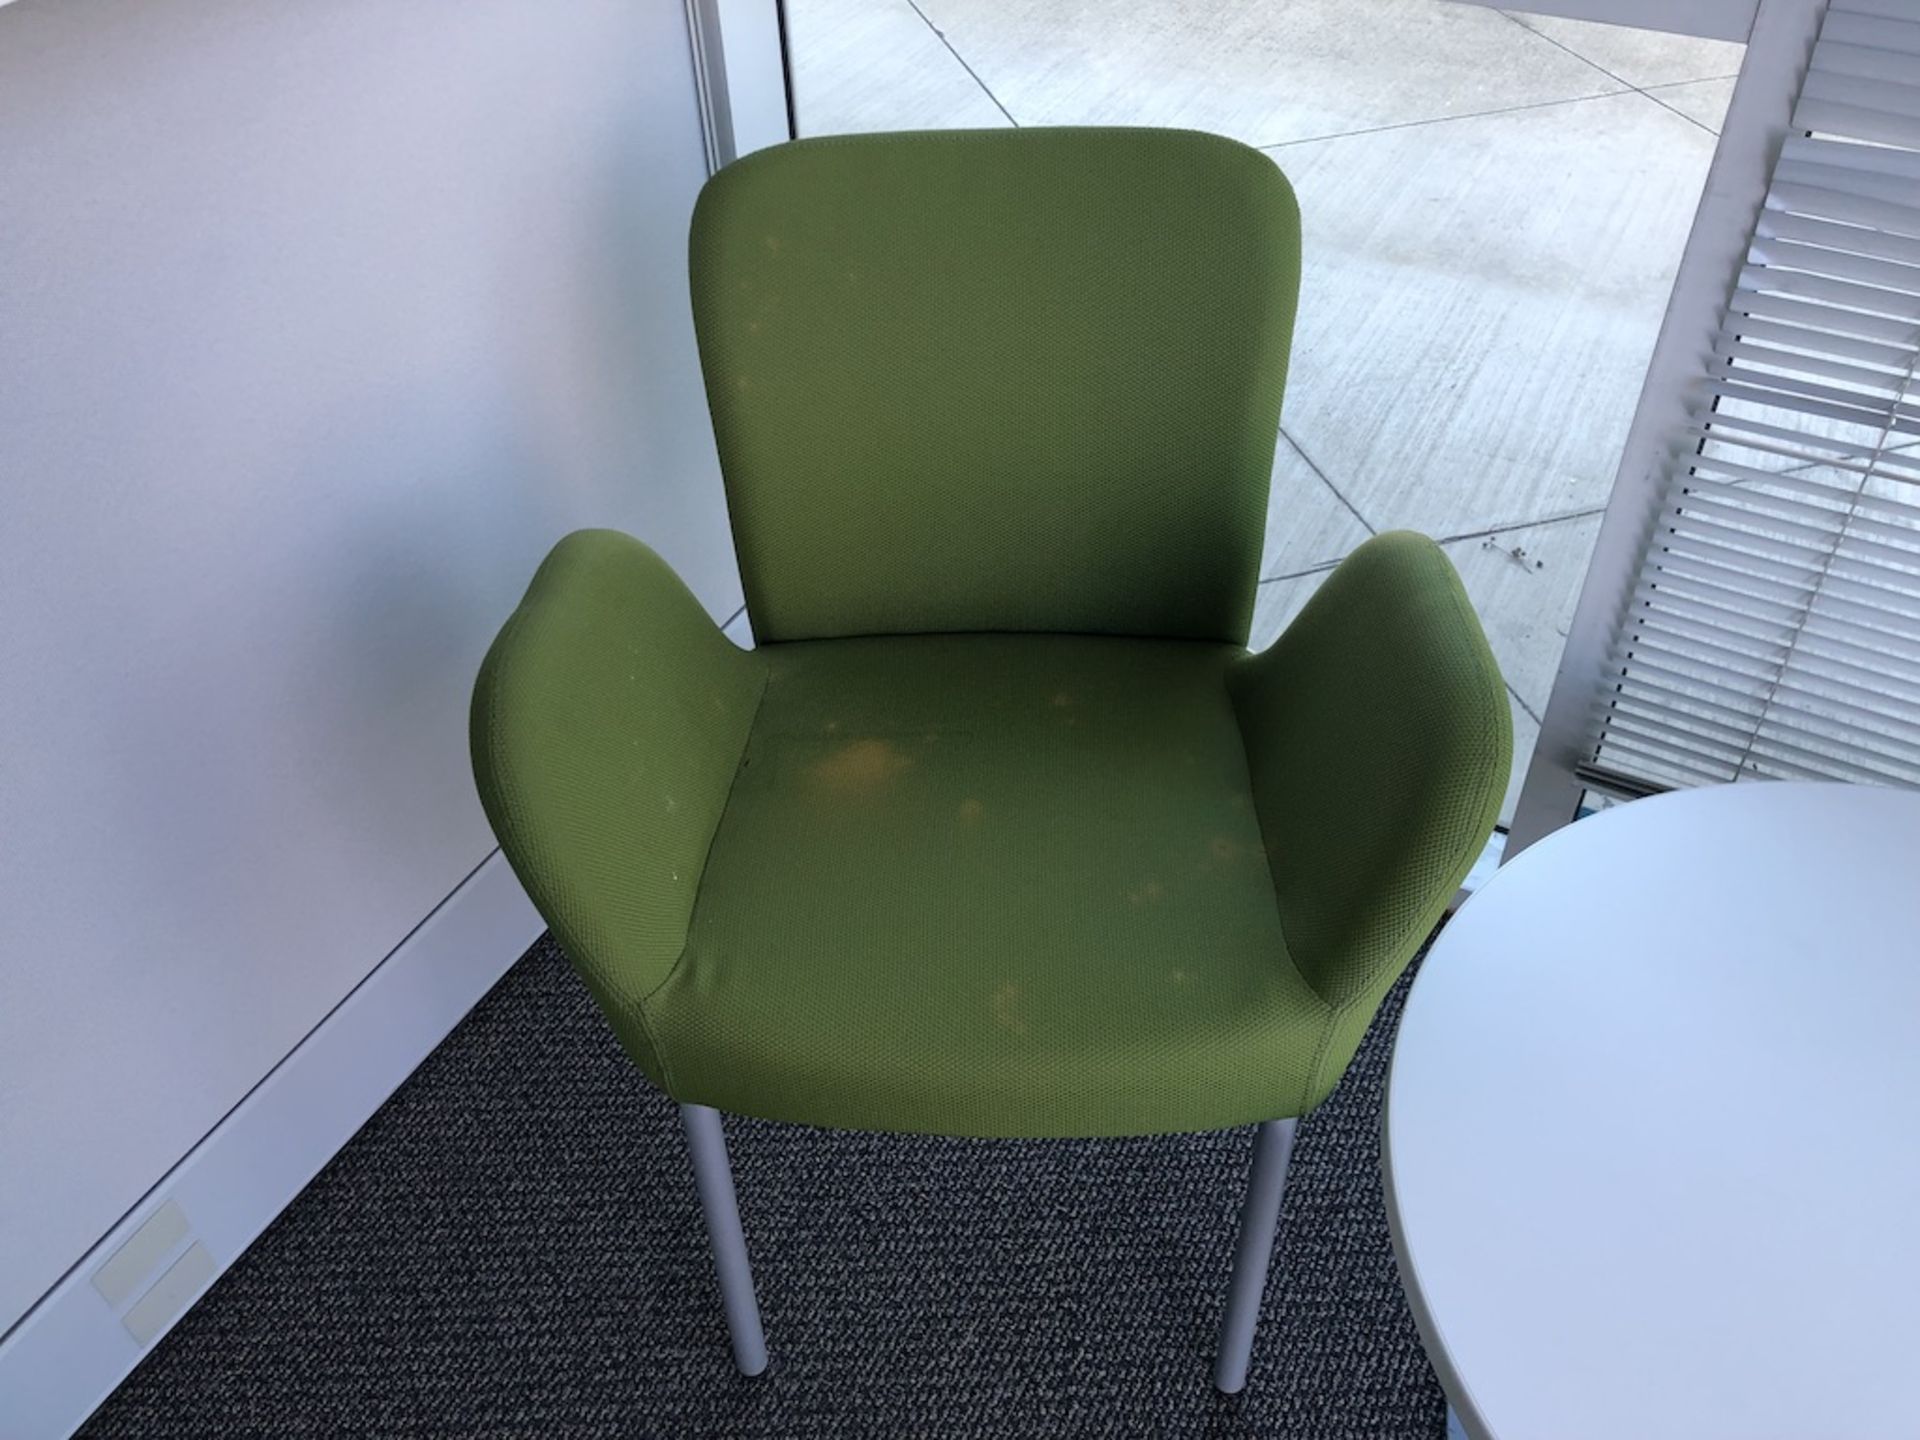 GREEN CUSHION PADDED CHAIR   SCHNEIDER ELECTRIC- 6611 PRESTON AVE SUITE A